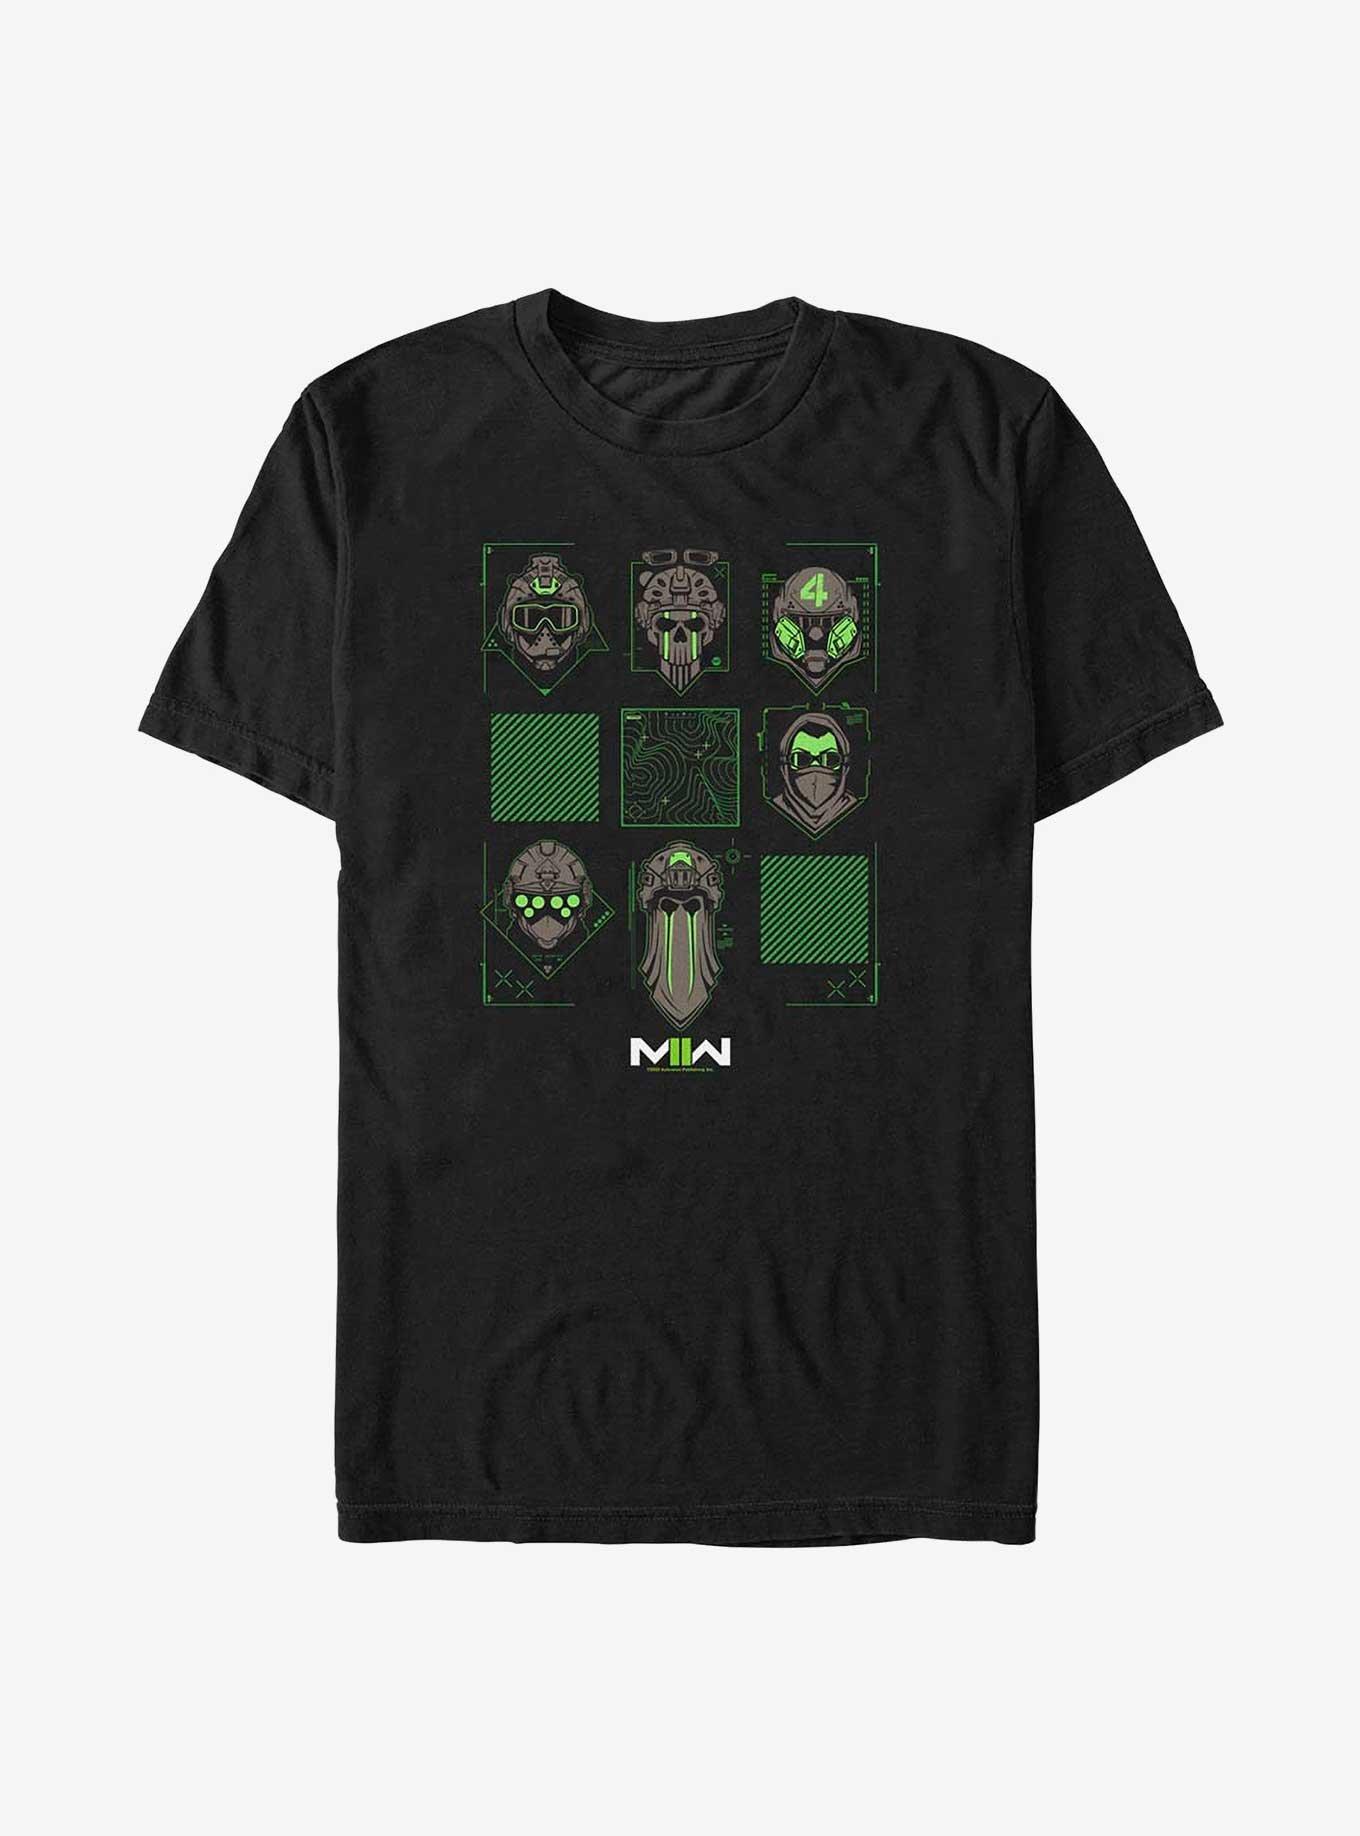 Call of Duty Tactical Soldiers T-Shirt, , hi-res